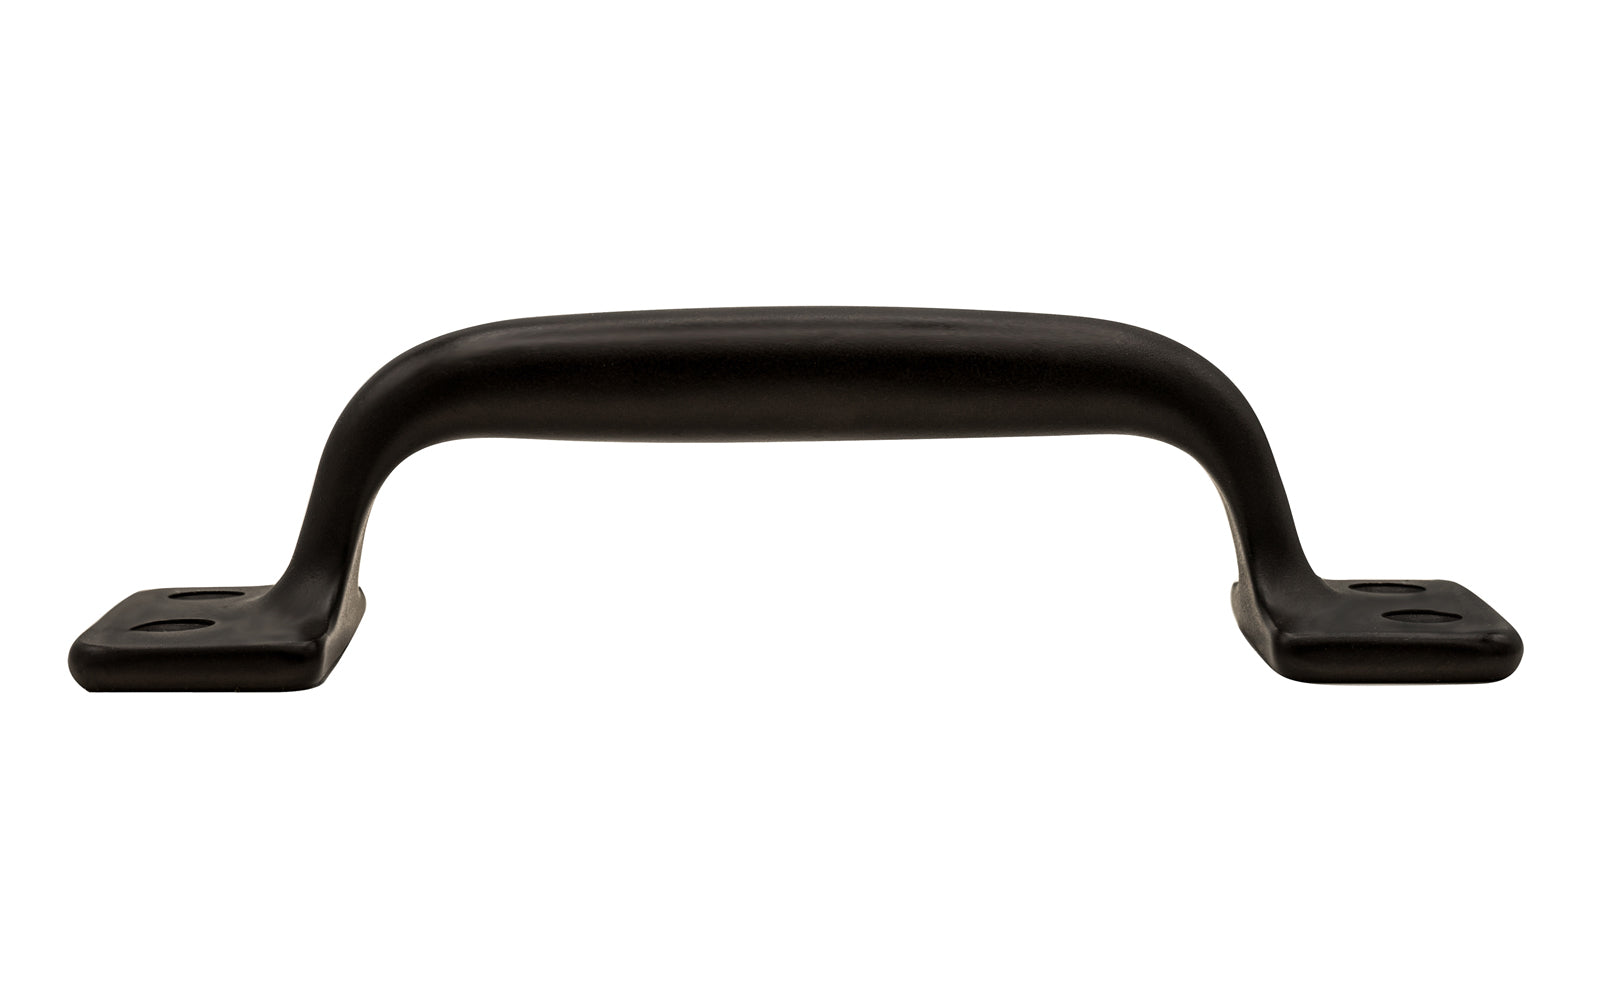 Vintage-style Hardware · Classic Solid Brass Handle Pull ~ 4-3/8" On Centers. Versatile handle is great for sash windows, cabinets, drawers, file cabinets. Arts & Crafts handle pull. Oil Rubbed Bronze Finish.